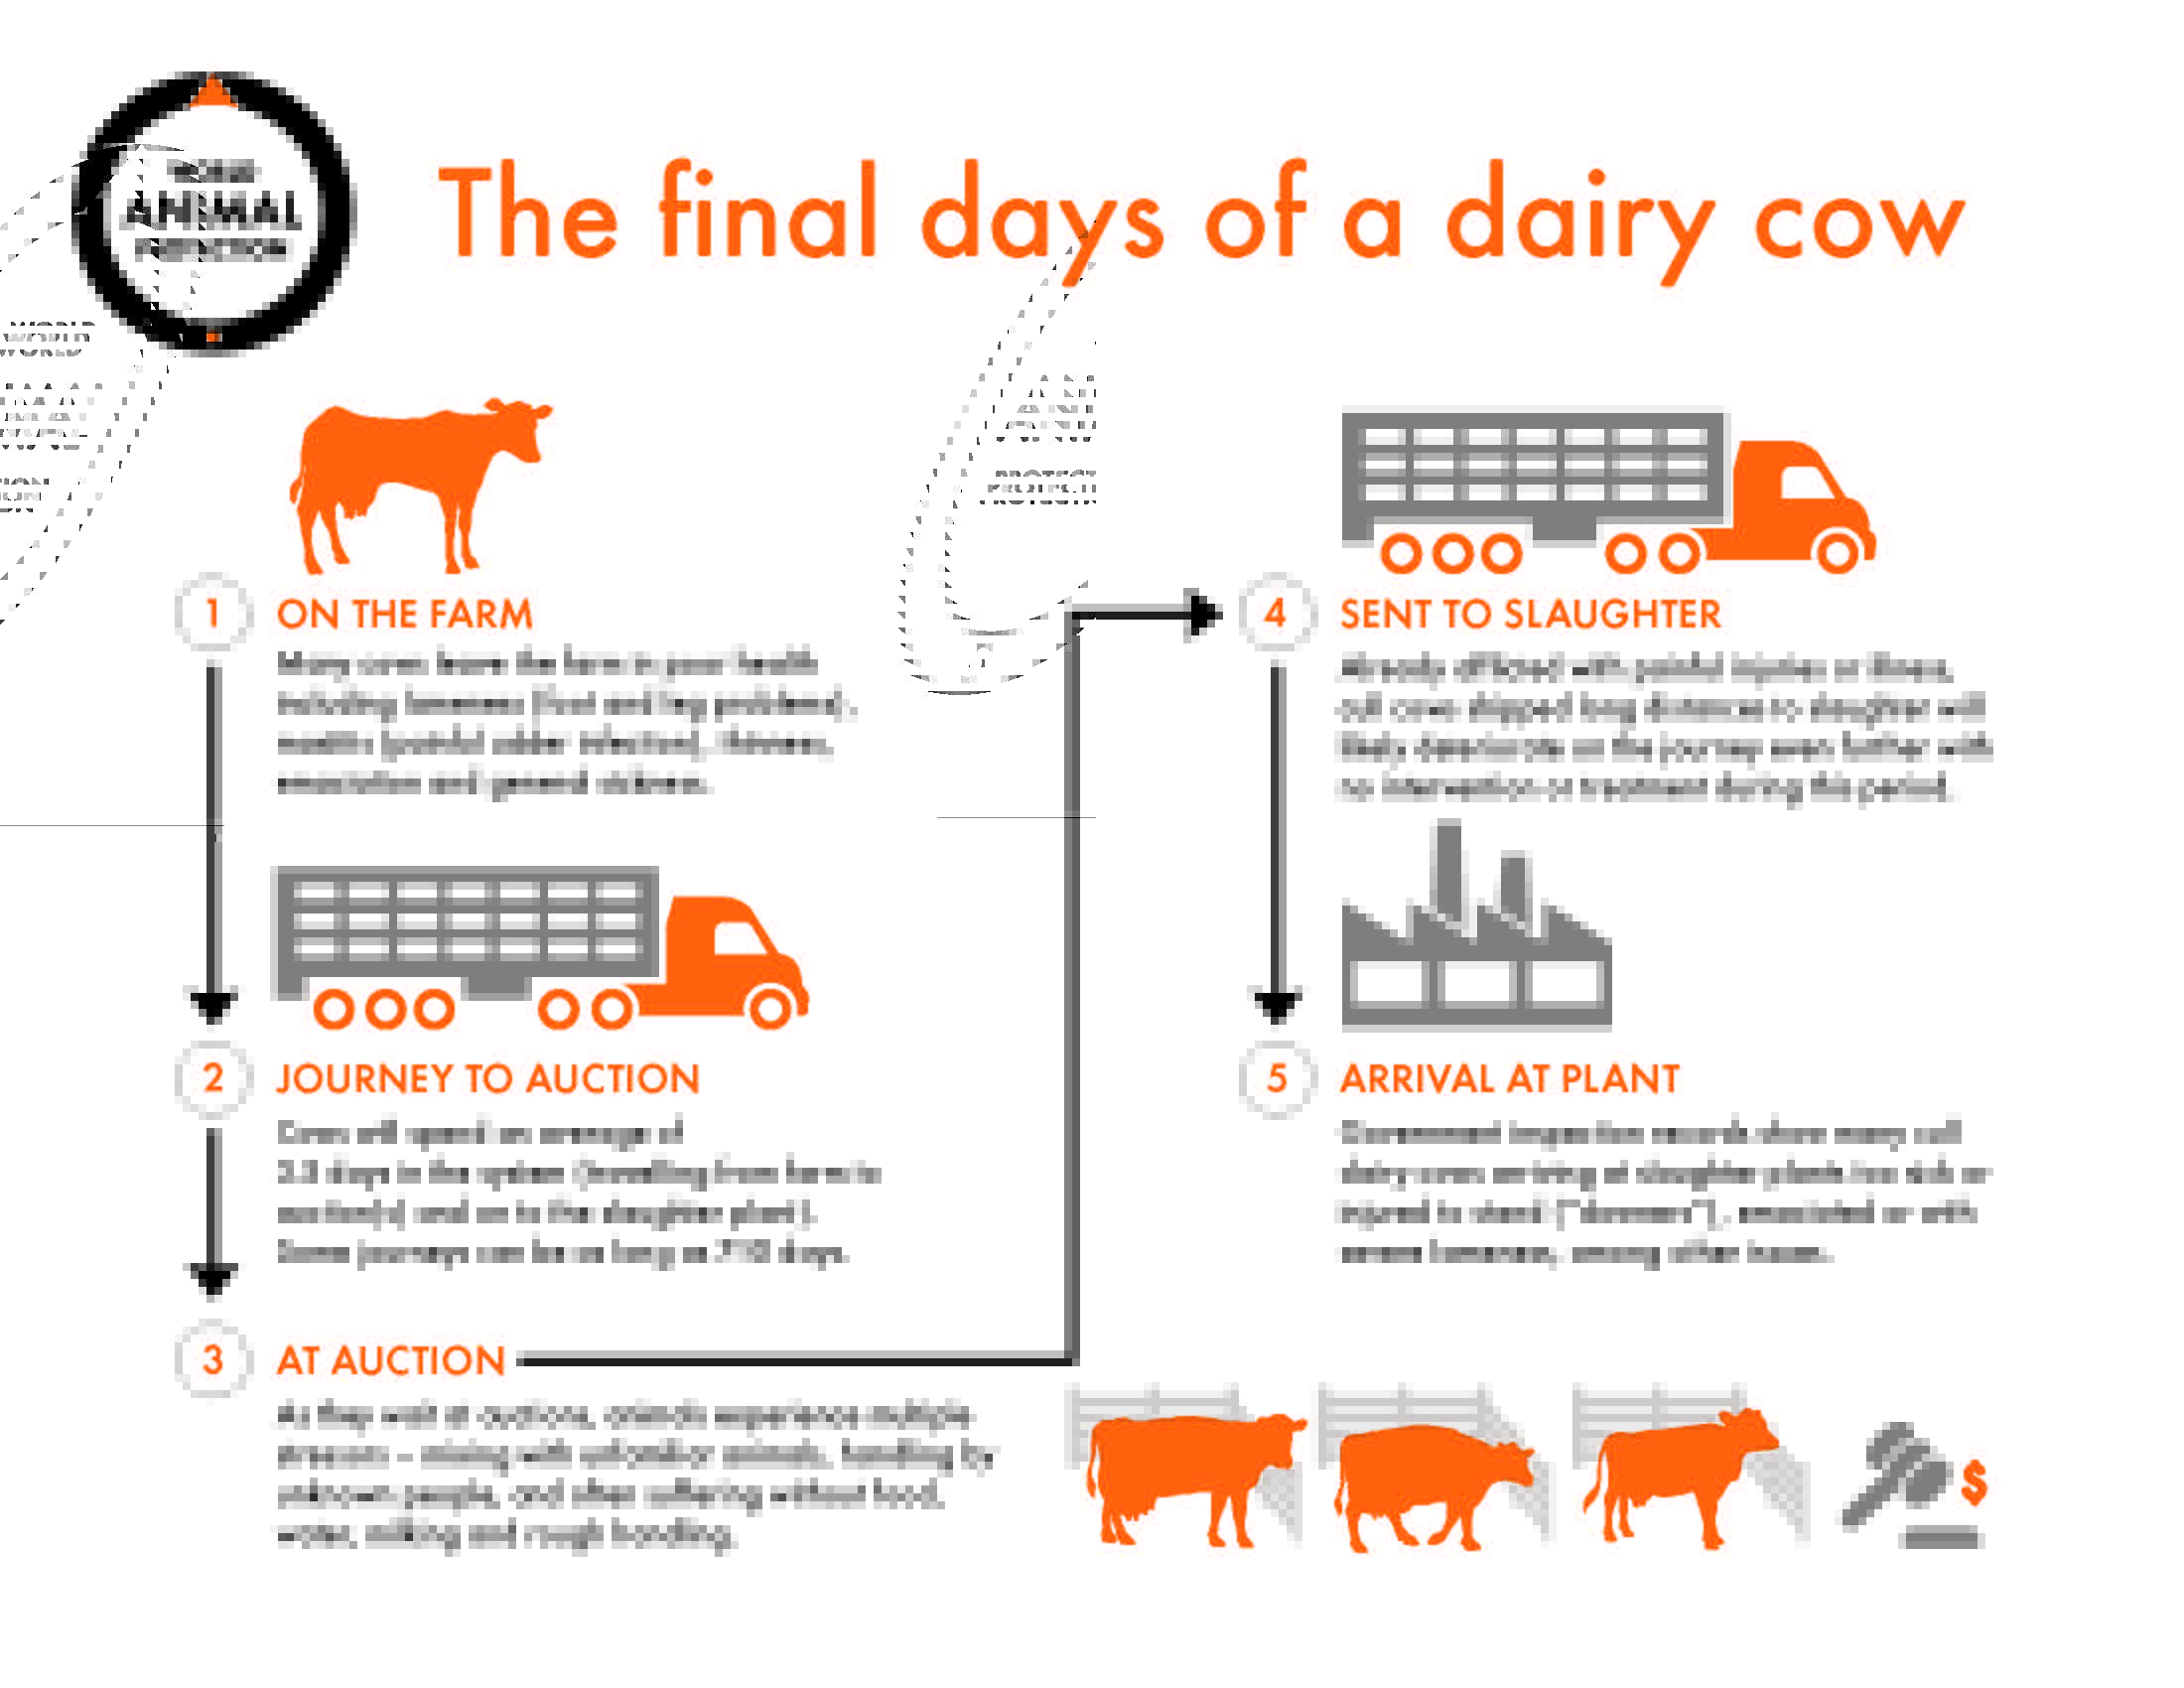 The final days of a dairy cow